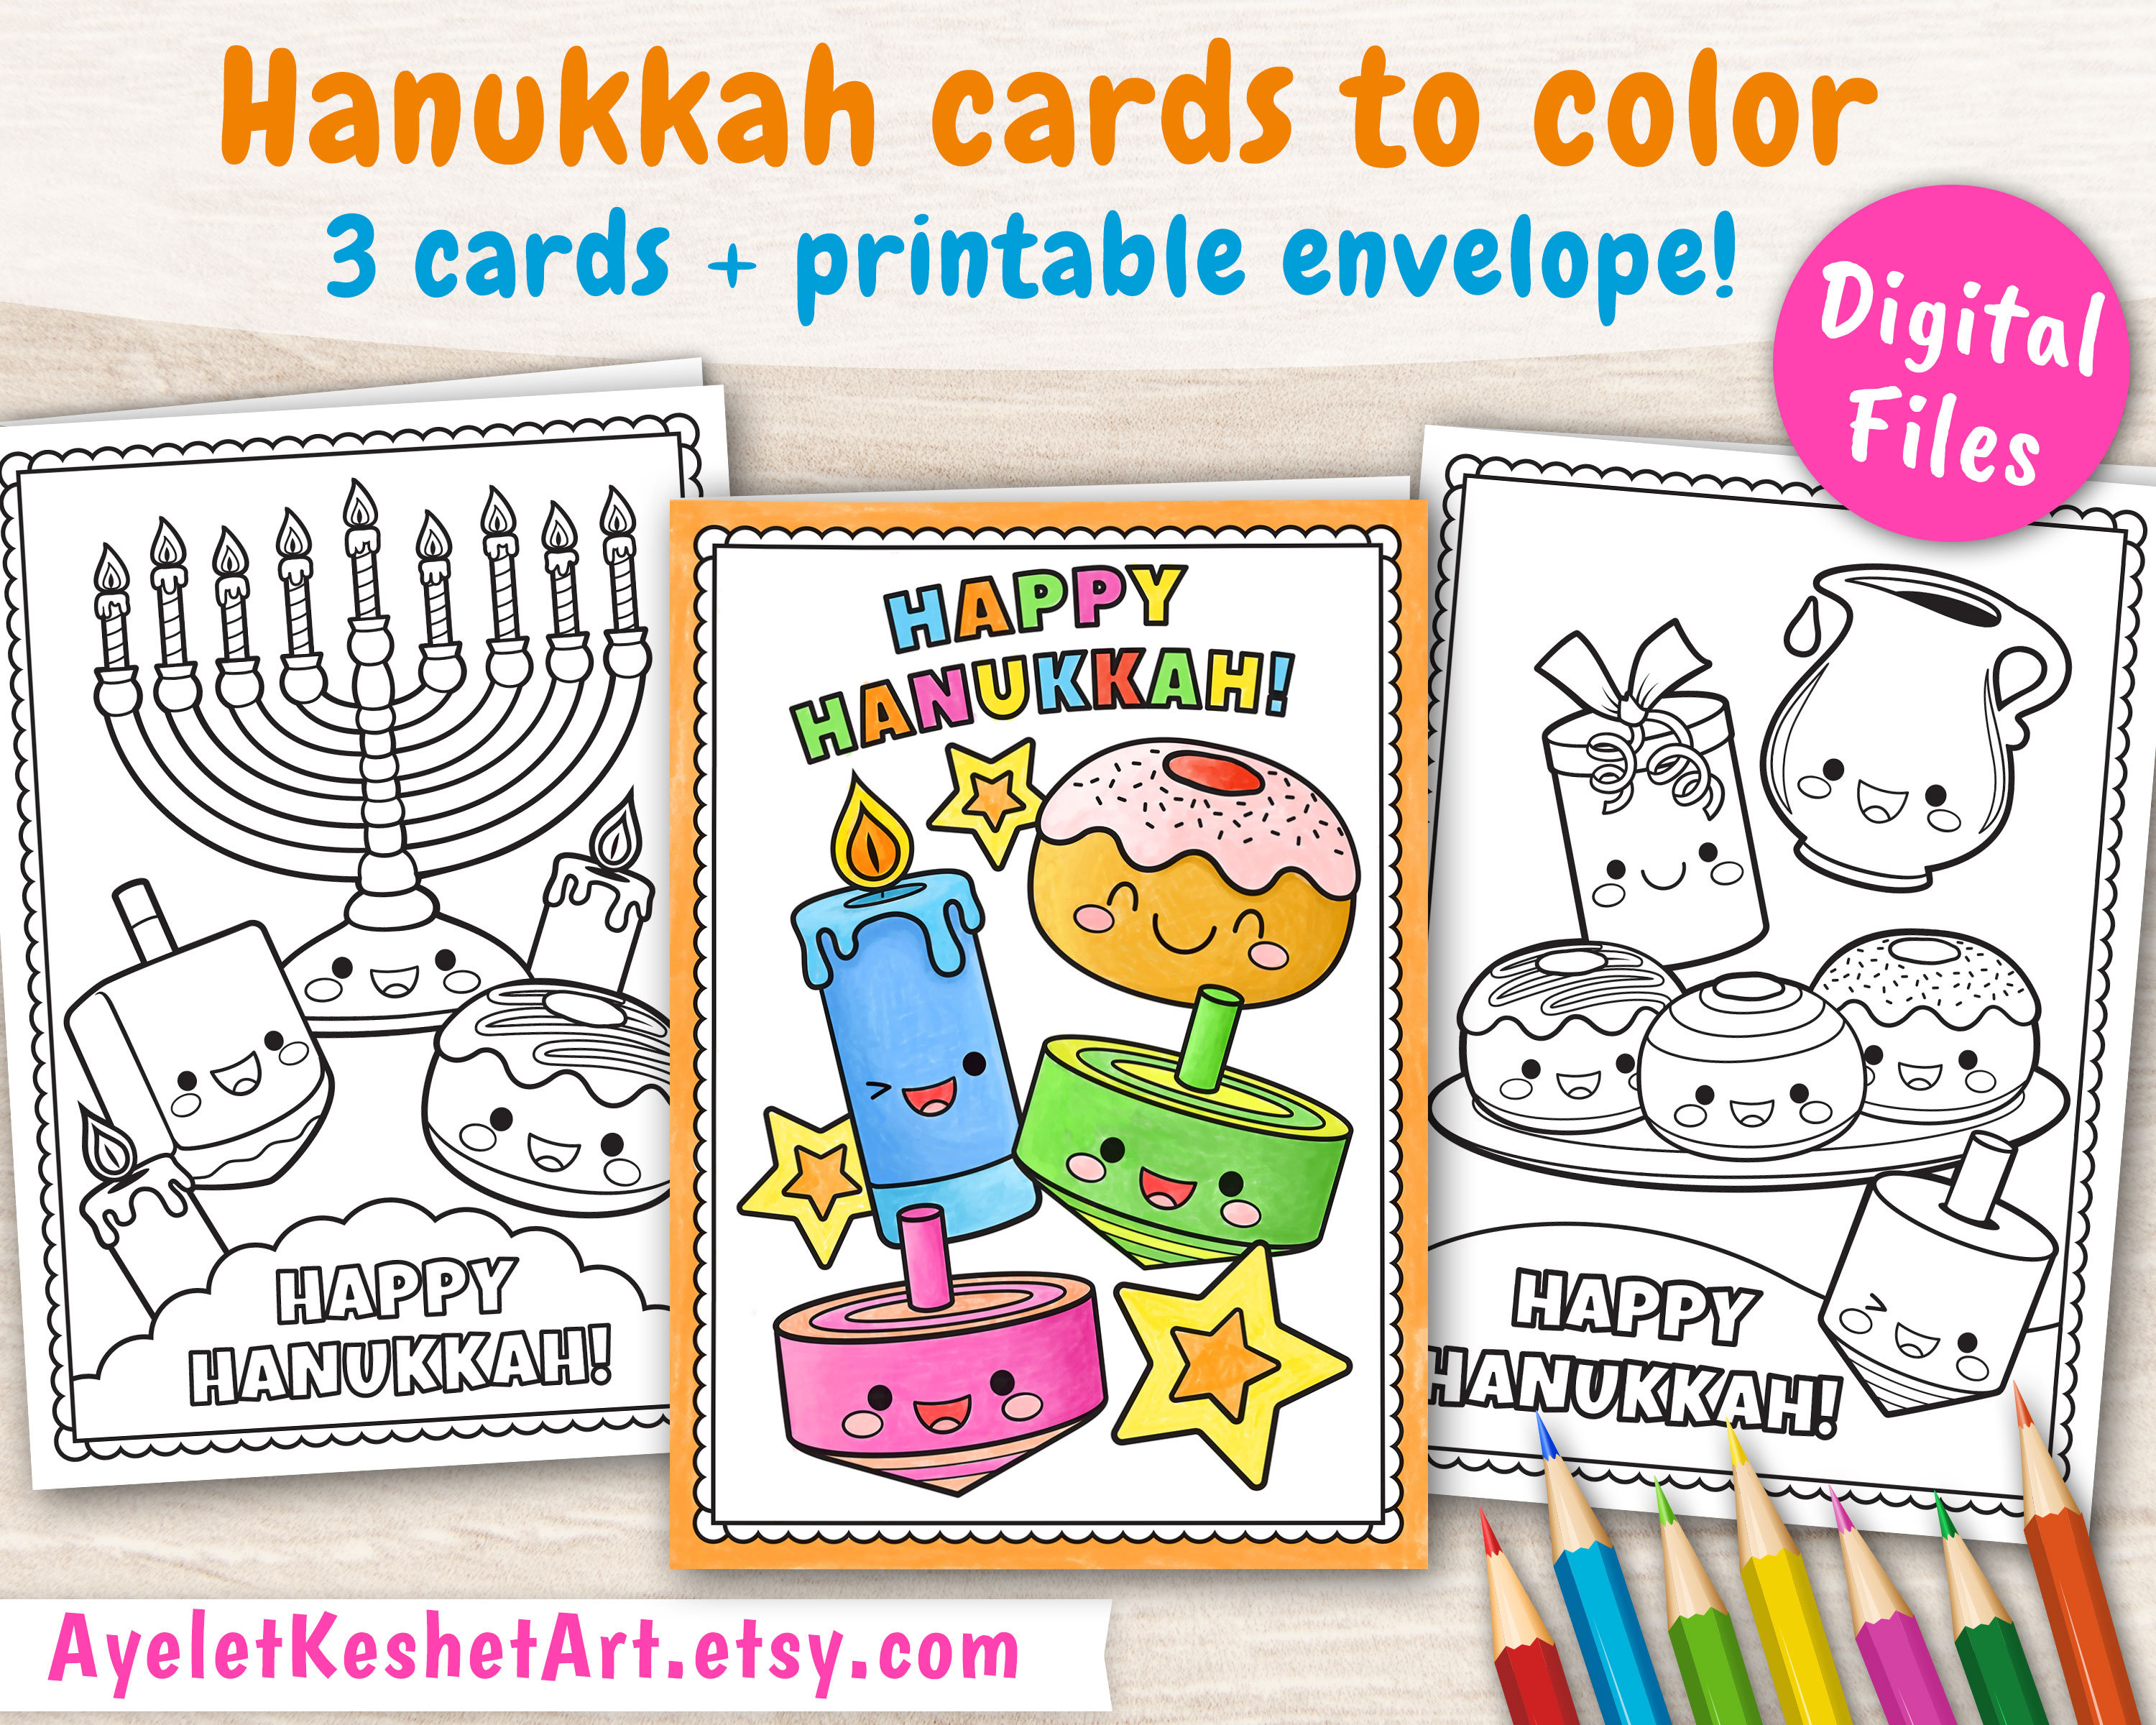 Hanukkah cards to color coloring pages of happy hanukkah card cute kawaii printable greeting cards instant download pdf download now